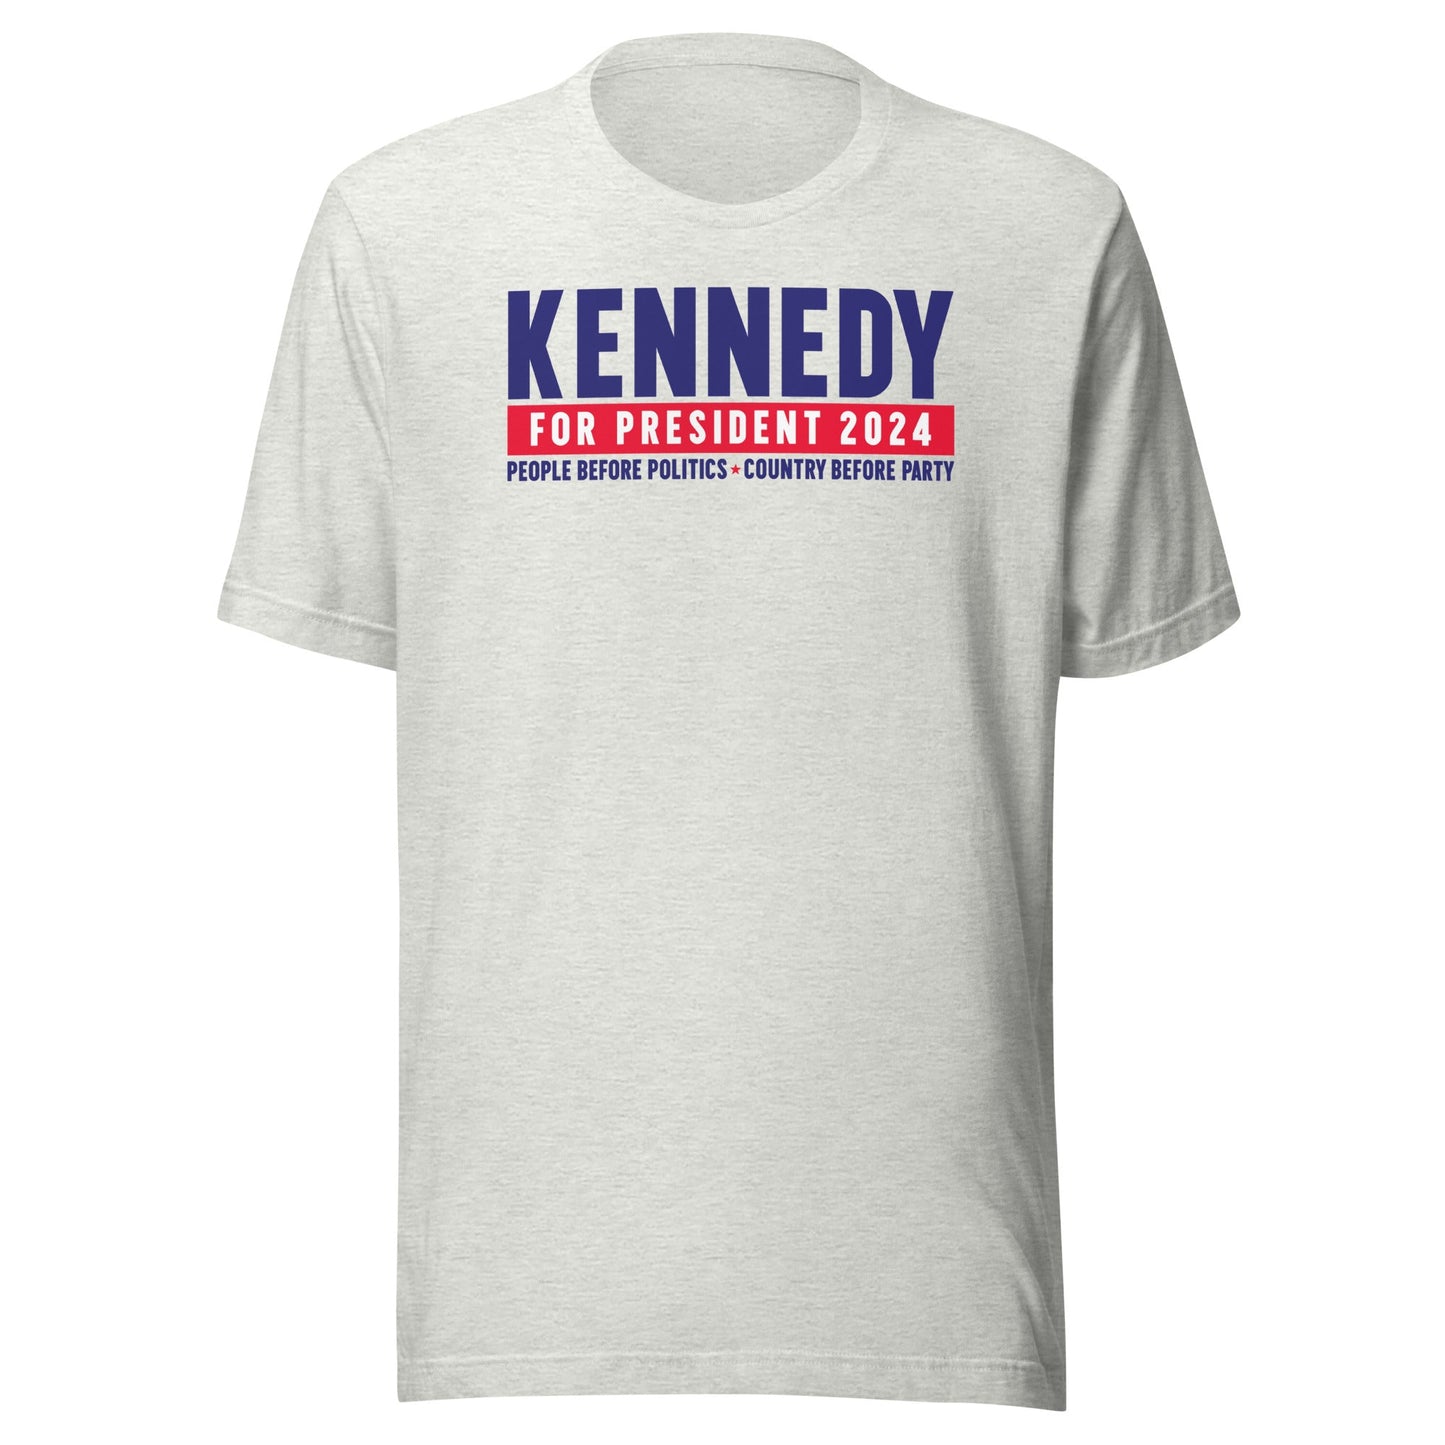 Kennedy for the People Unisex Tee - TEAM KENNEDY. All rights reserved